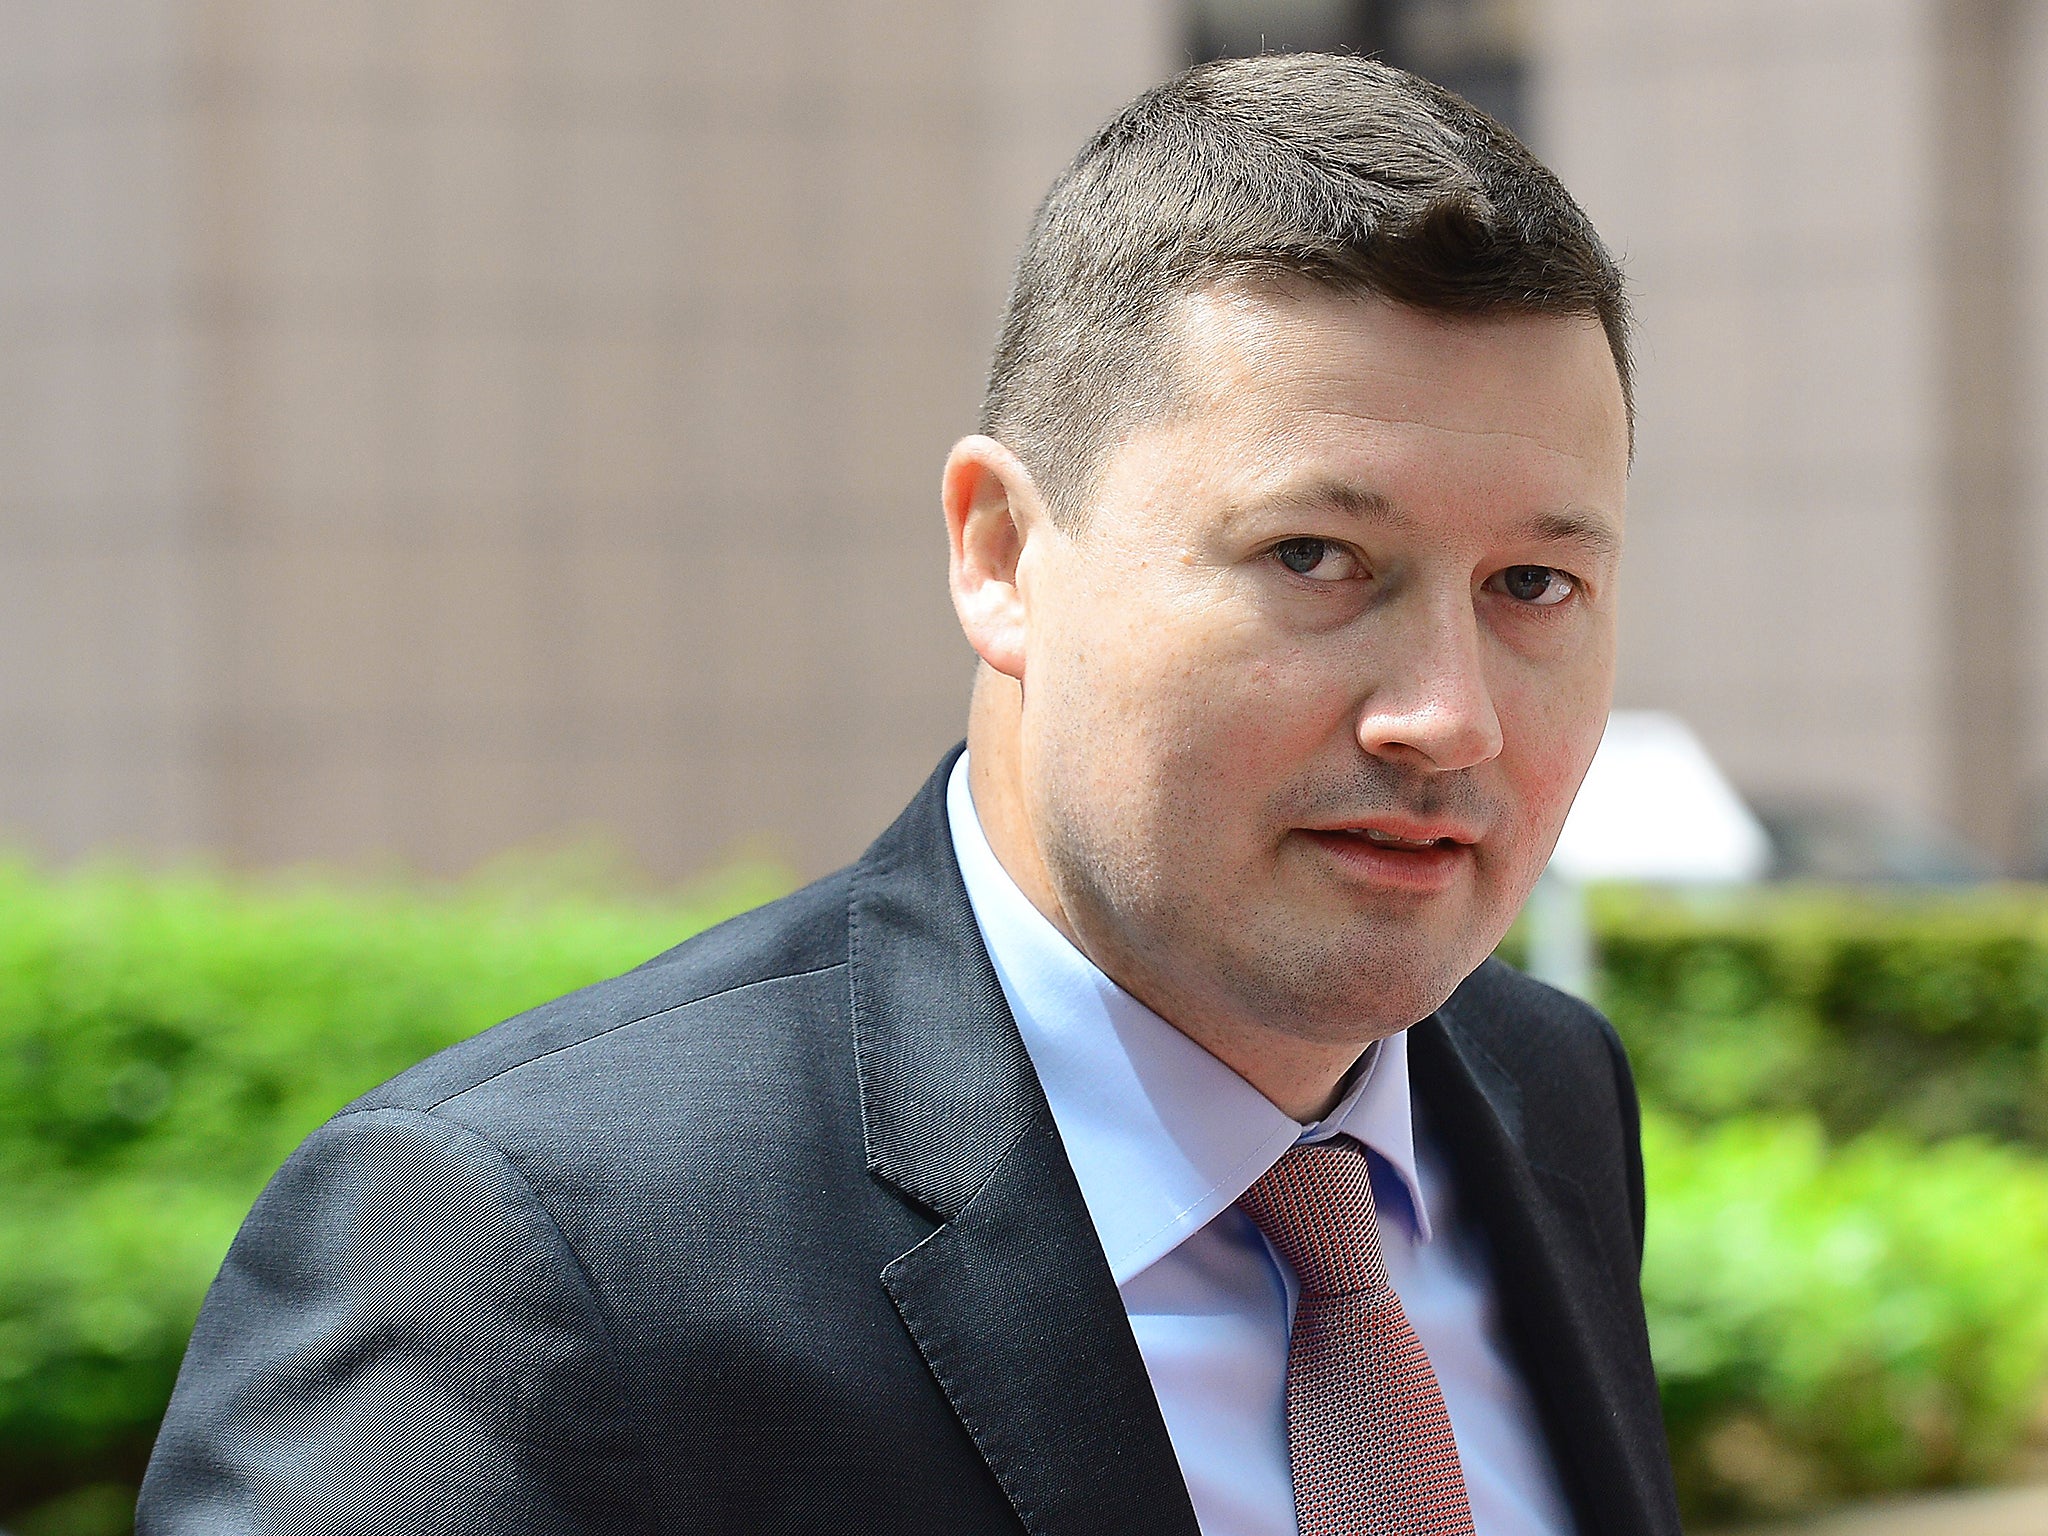 Martin Selmayr is thought to be behind the emergence of a £50bn ‘divorce demand’ by Brussels (Getty)